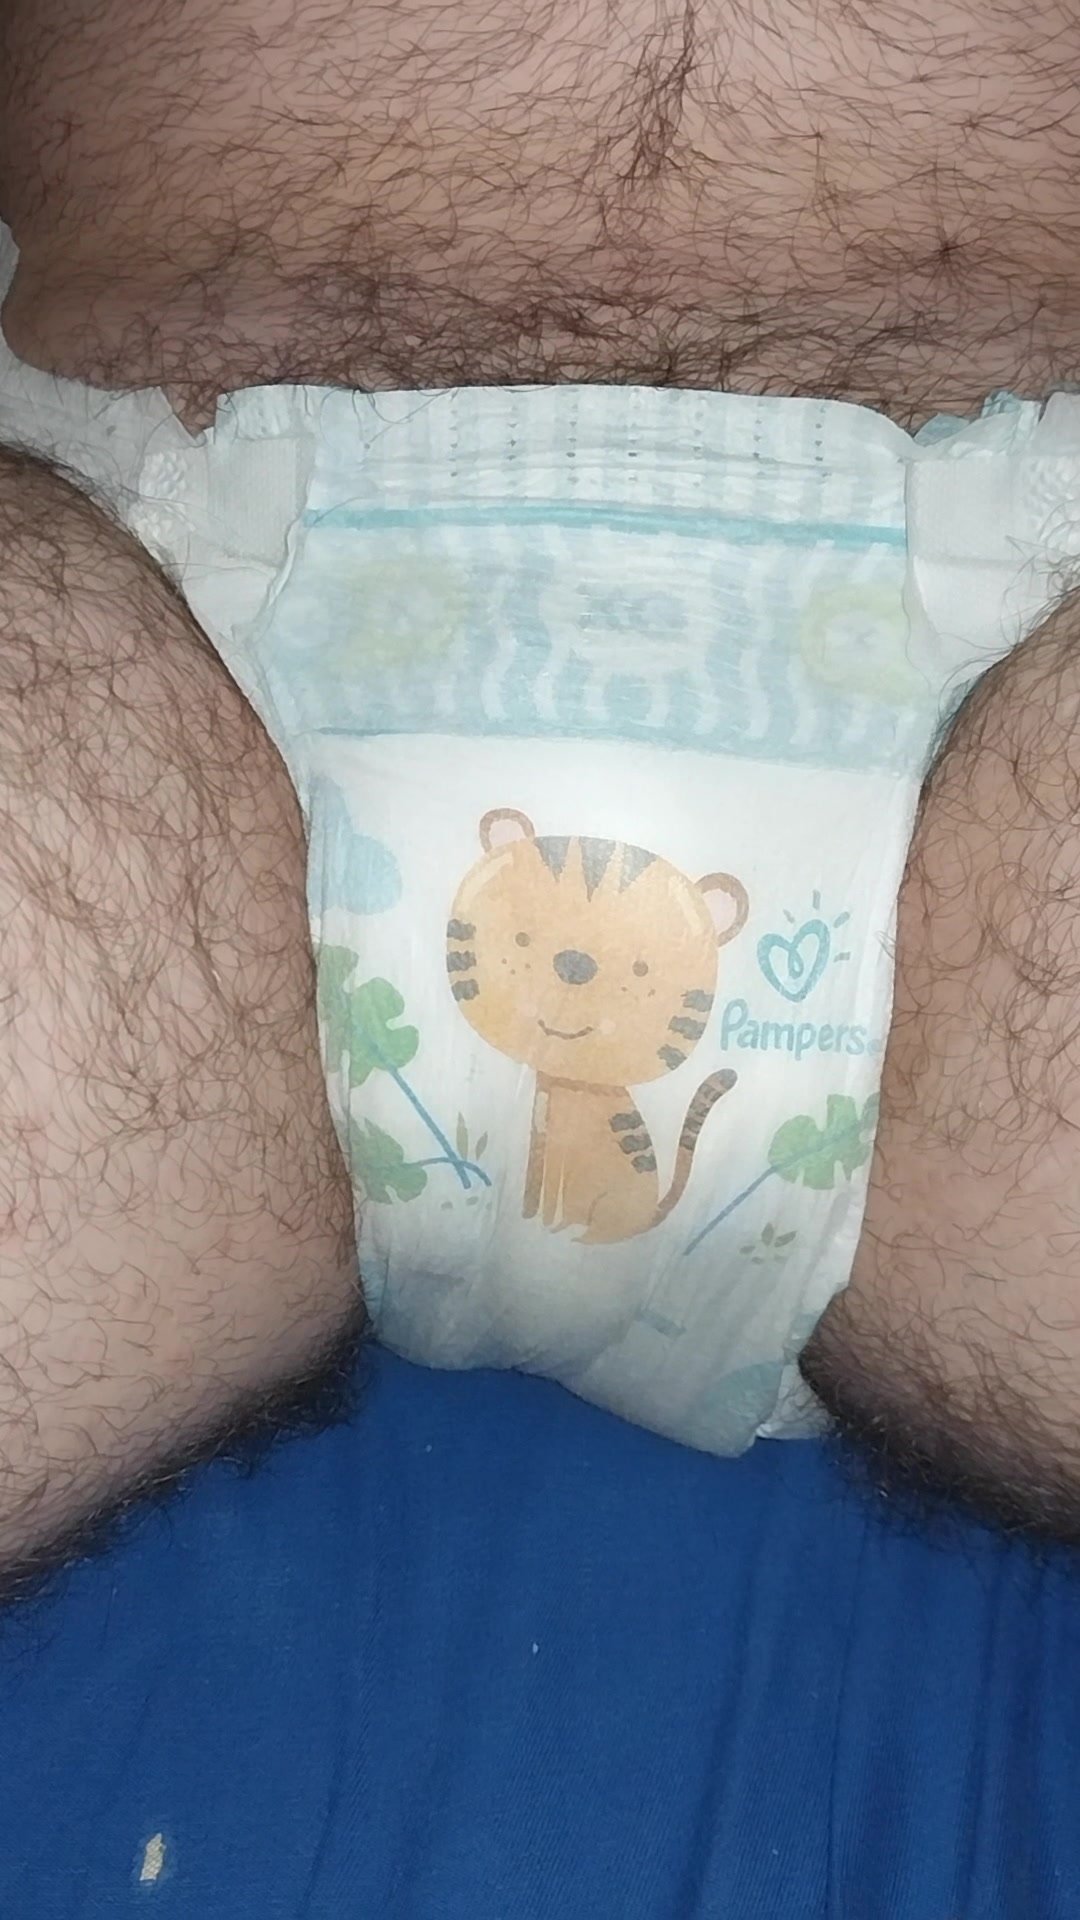 Pampers - video 9